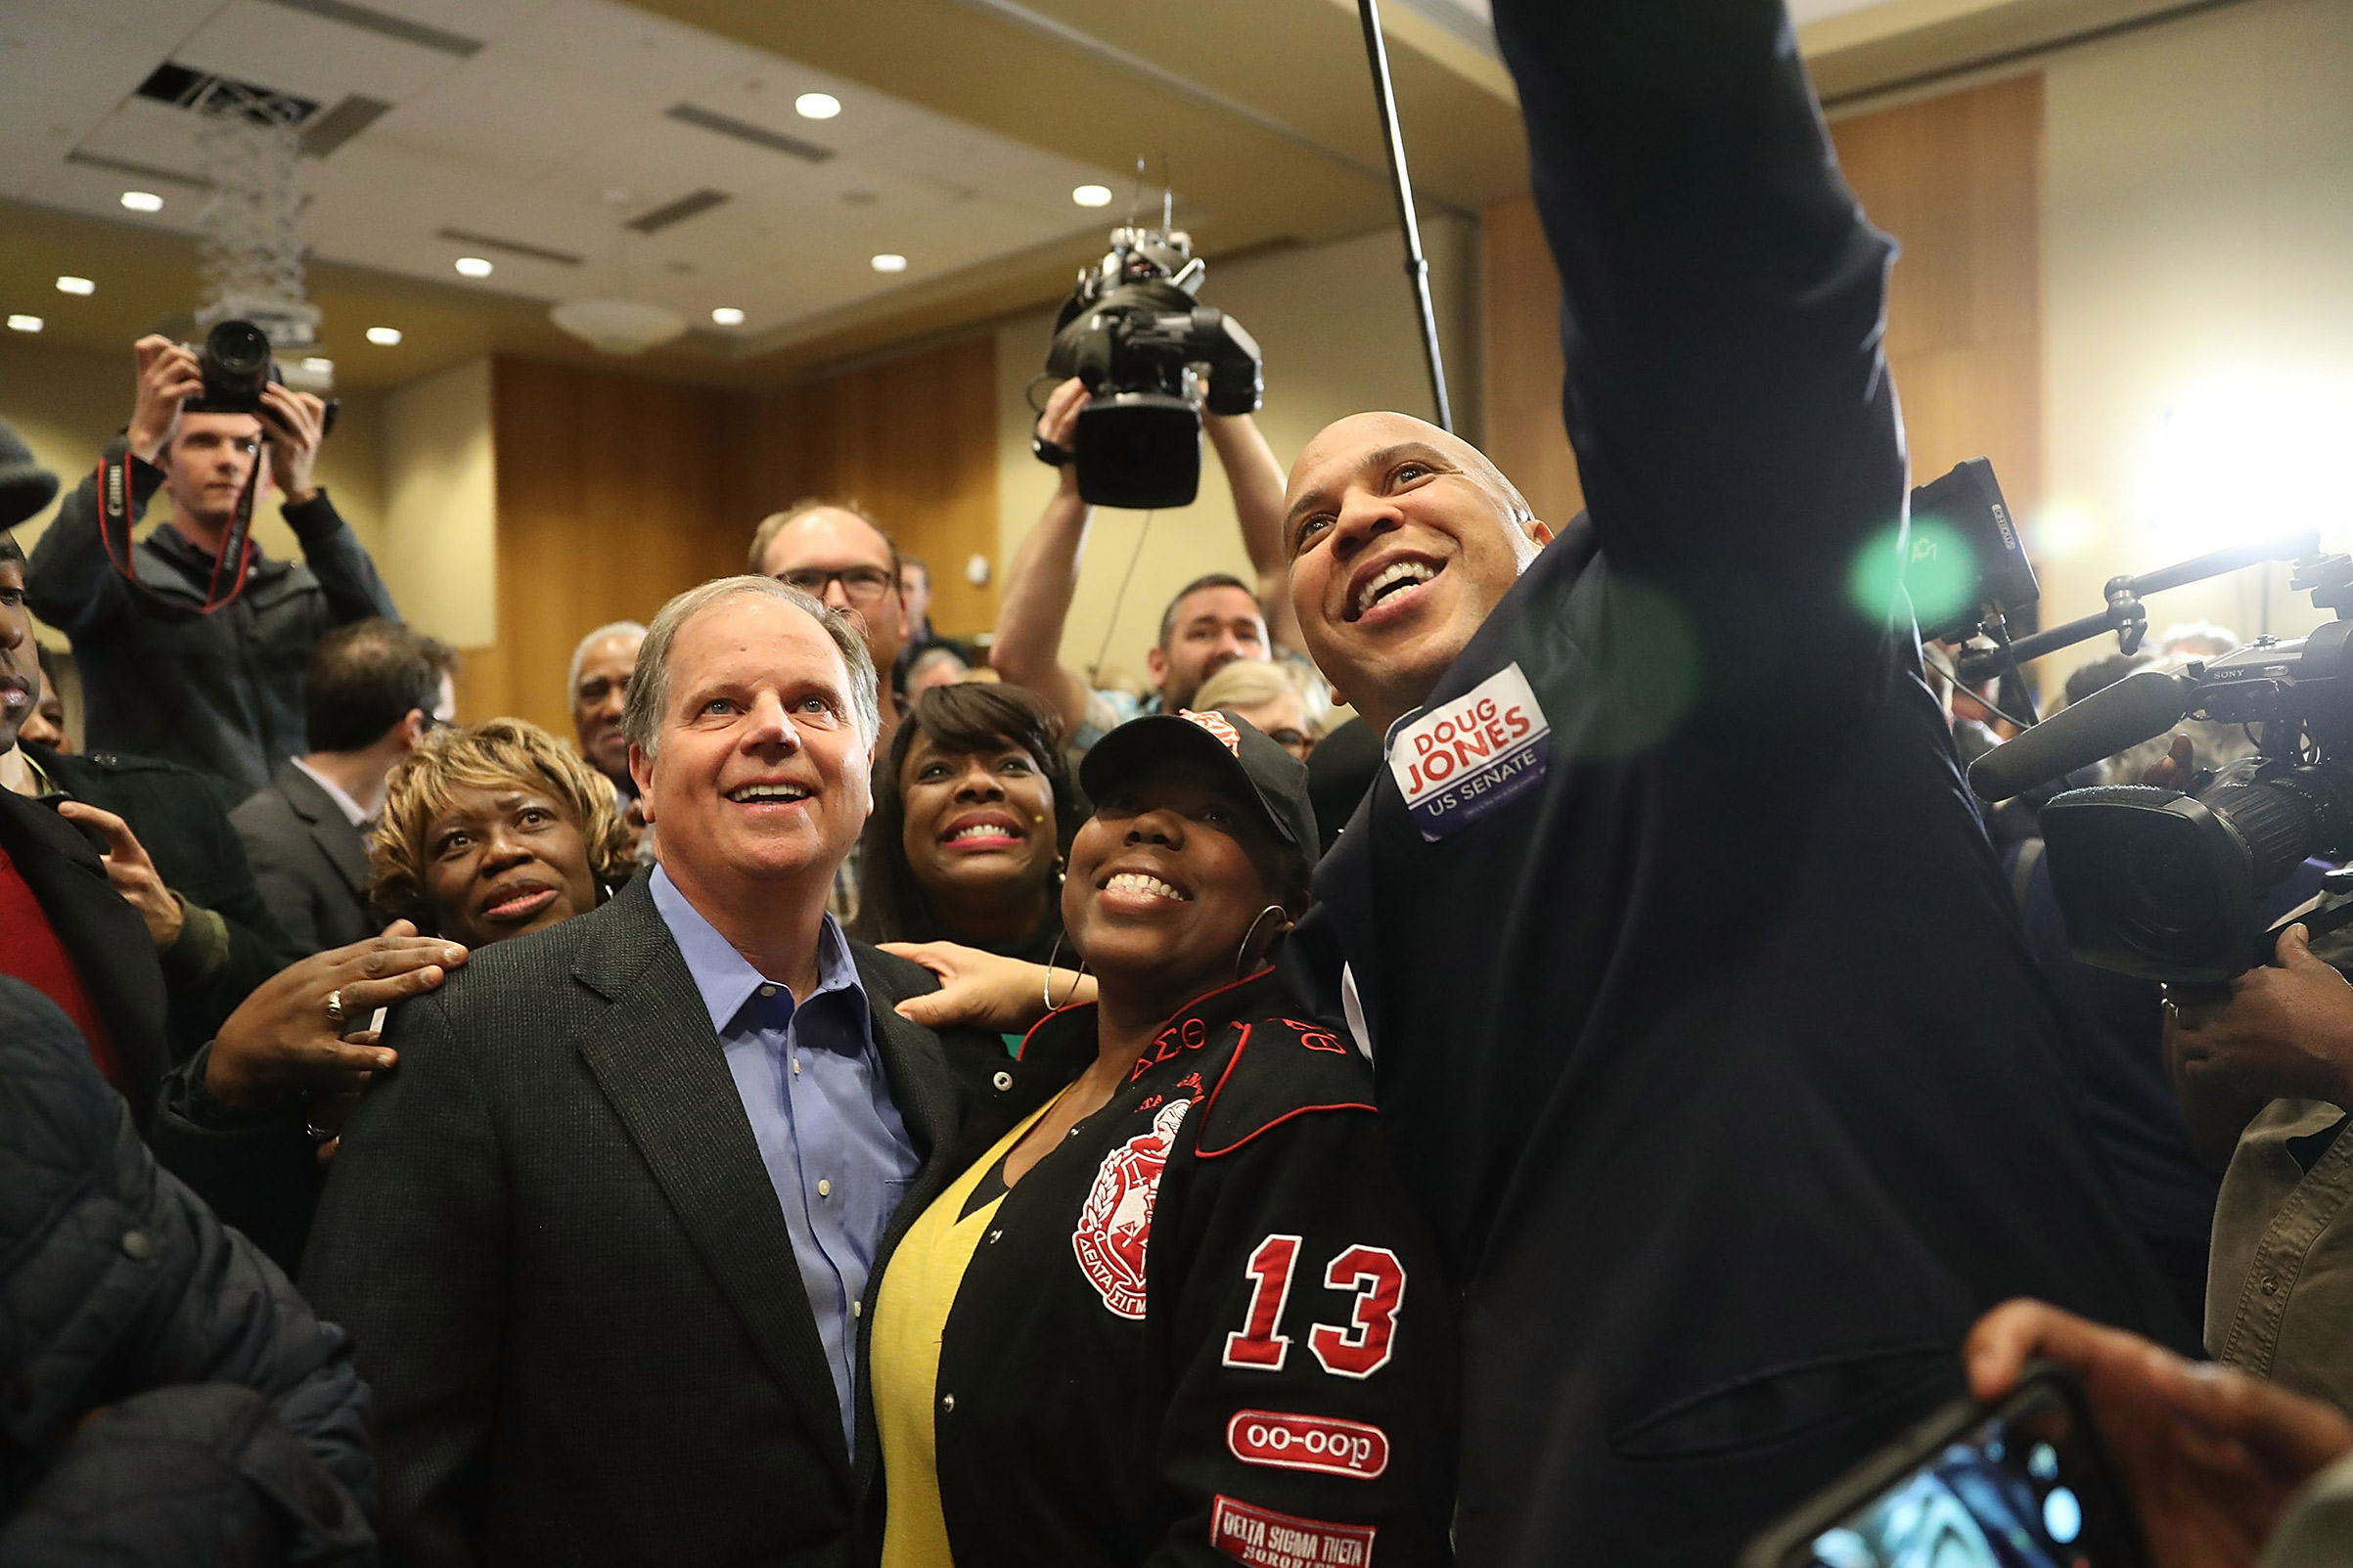 Democratic Senatorial candidate Doug Jones takes a group picture with Sen. Cory Booker (D-NJ) (R) and Rep. Terri Sewell (D-AL) (third from right) and supporters during a campaign event held at Alabama State University on December 9, 2017, in Montgomery, Alabama. (Joe Raedle—Getty Images)